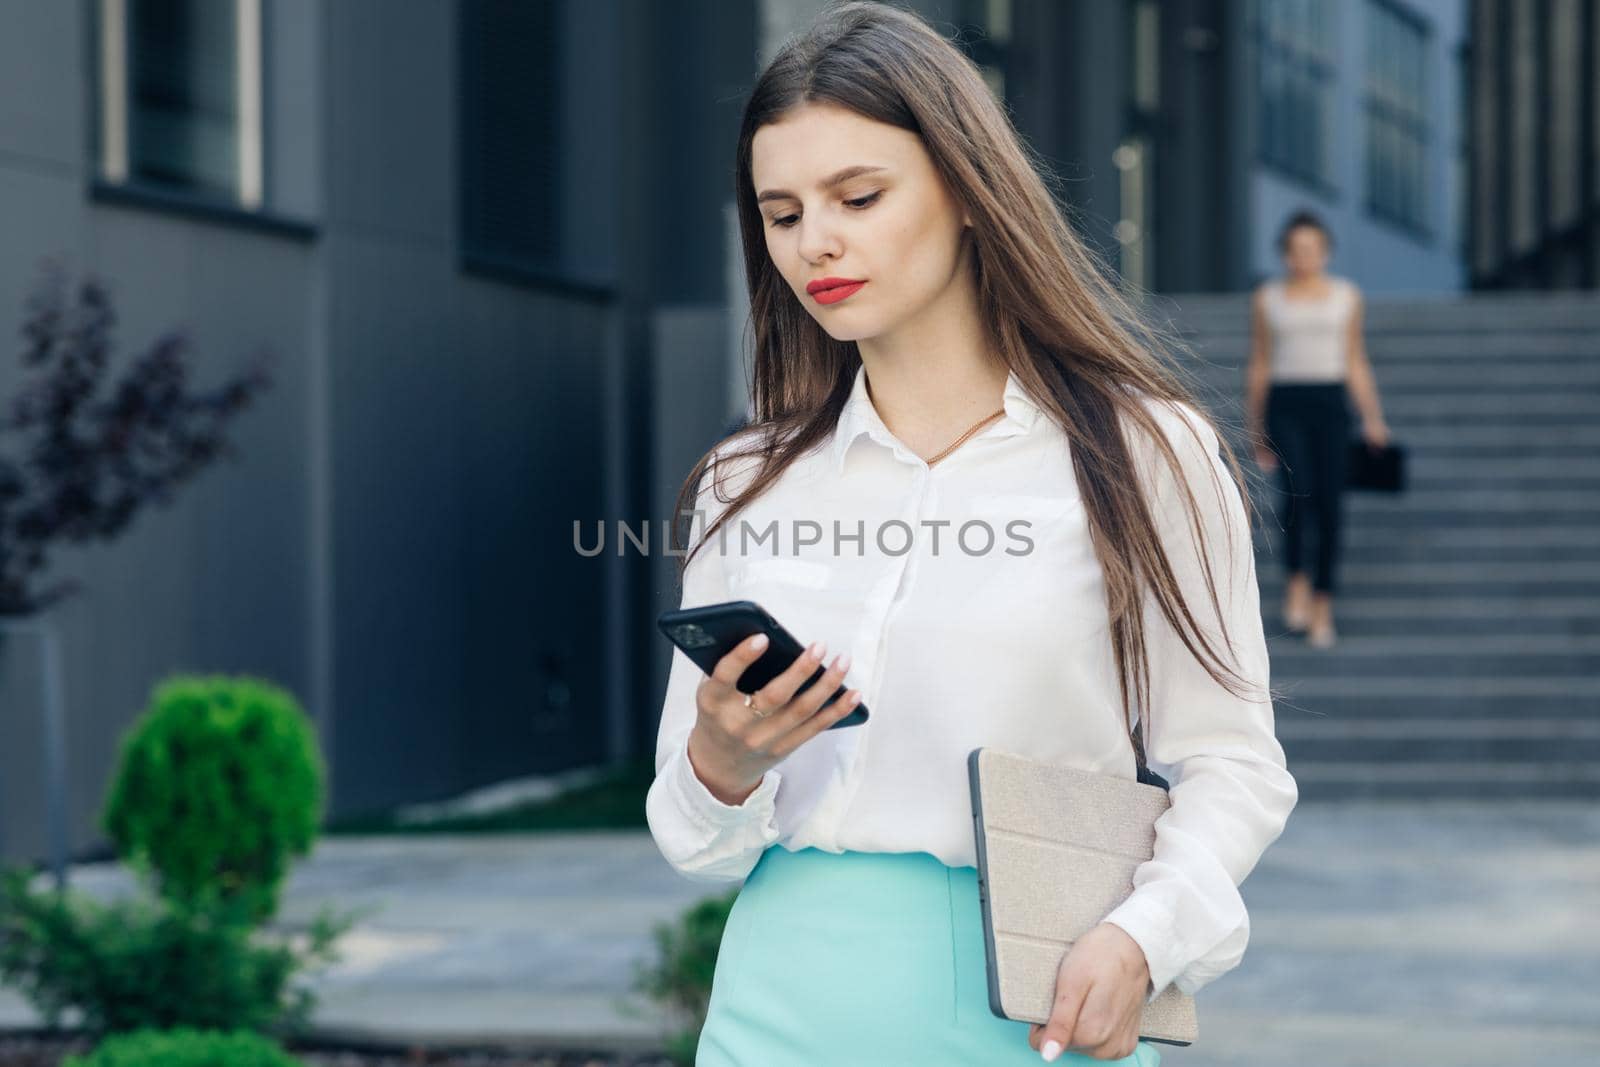 Stylish businesswoman using her phone outdoors. Beautiful female with long hair reading a message using her smartphone in front of building by uflypro